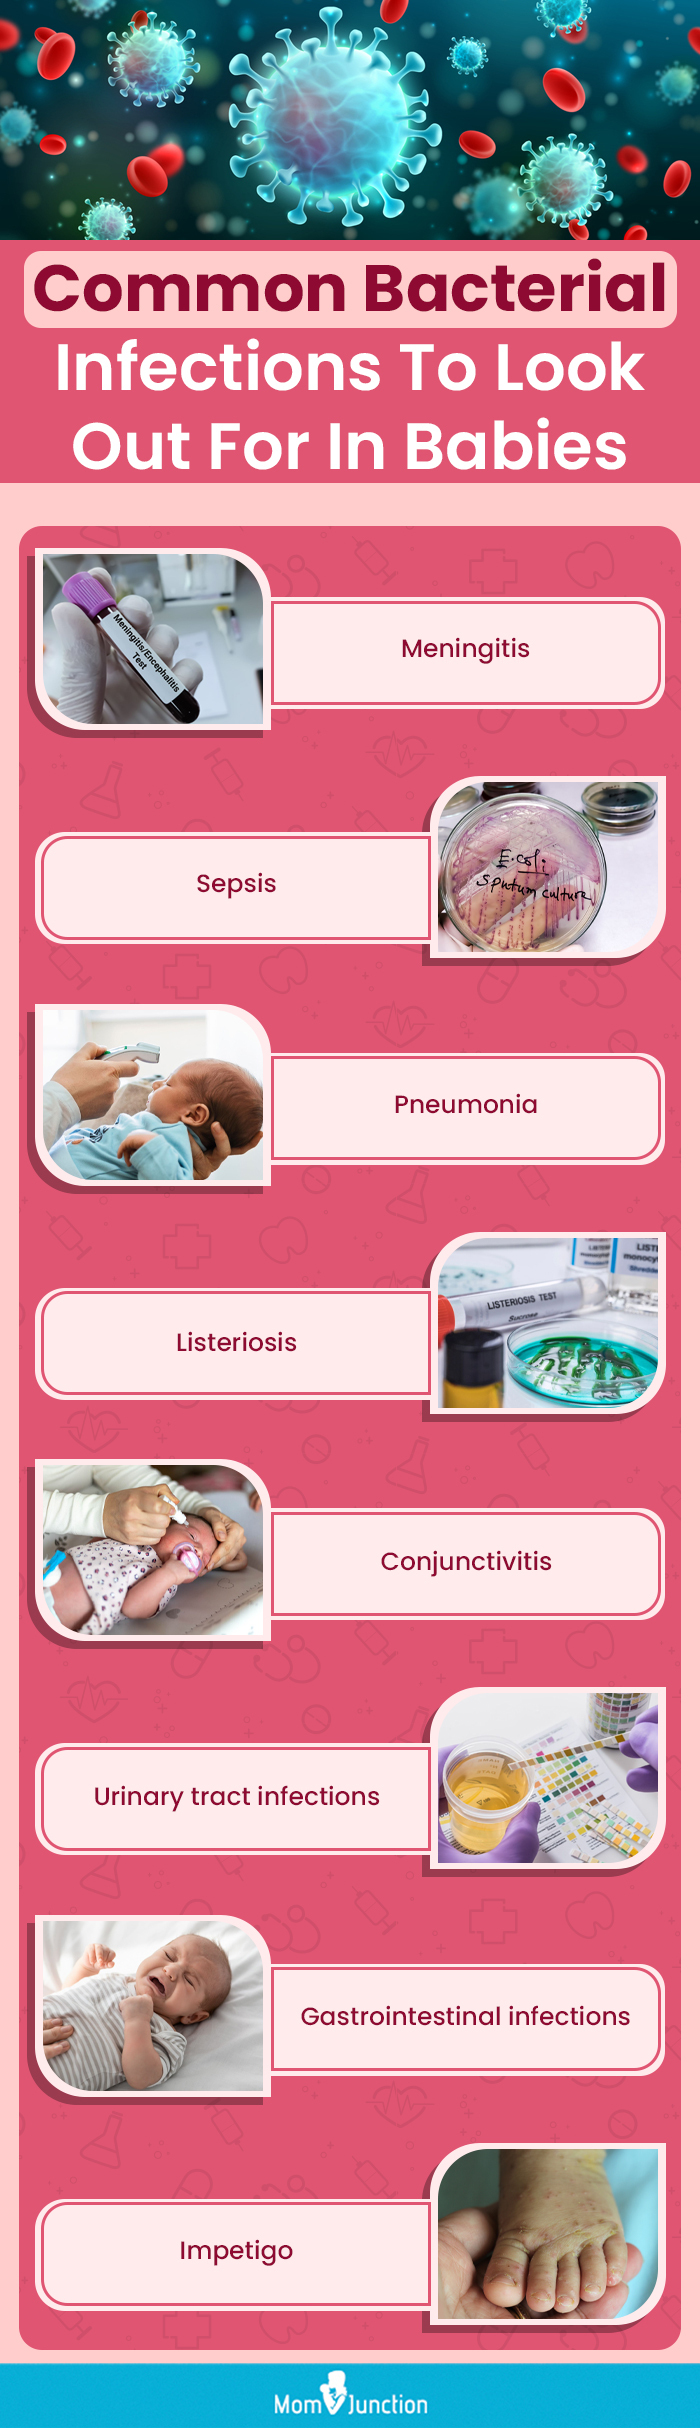 common bacterial infections to look out for in babies (infographic)